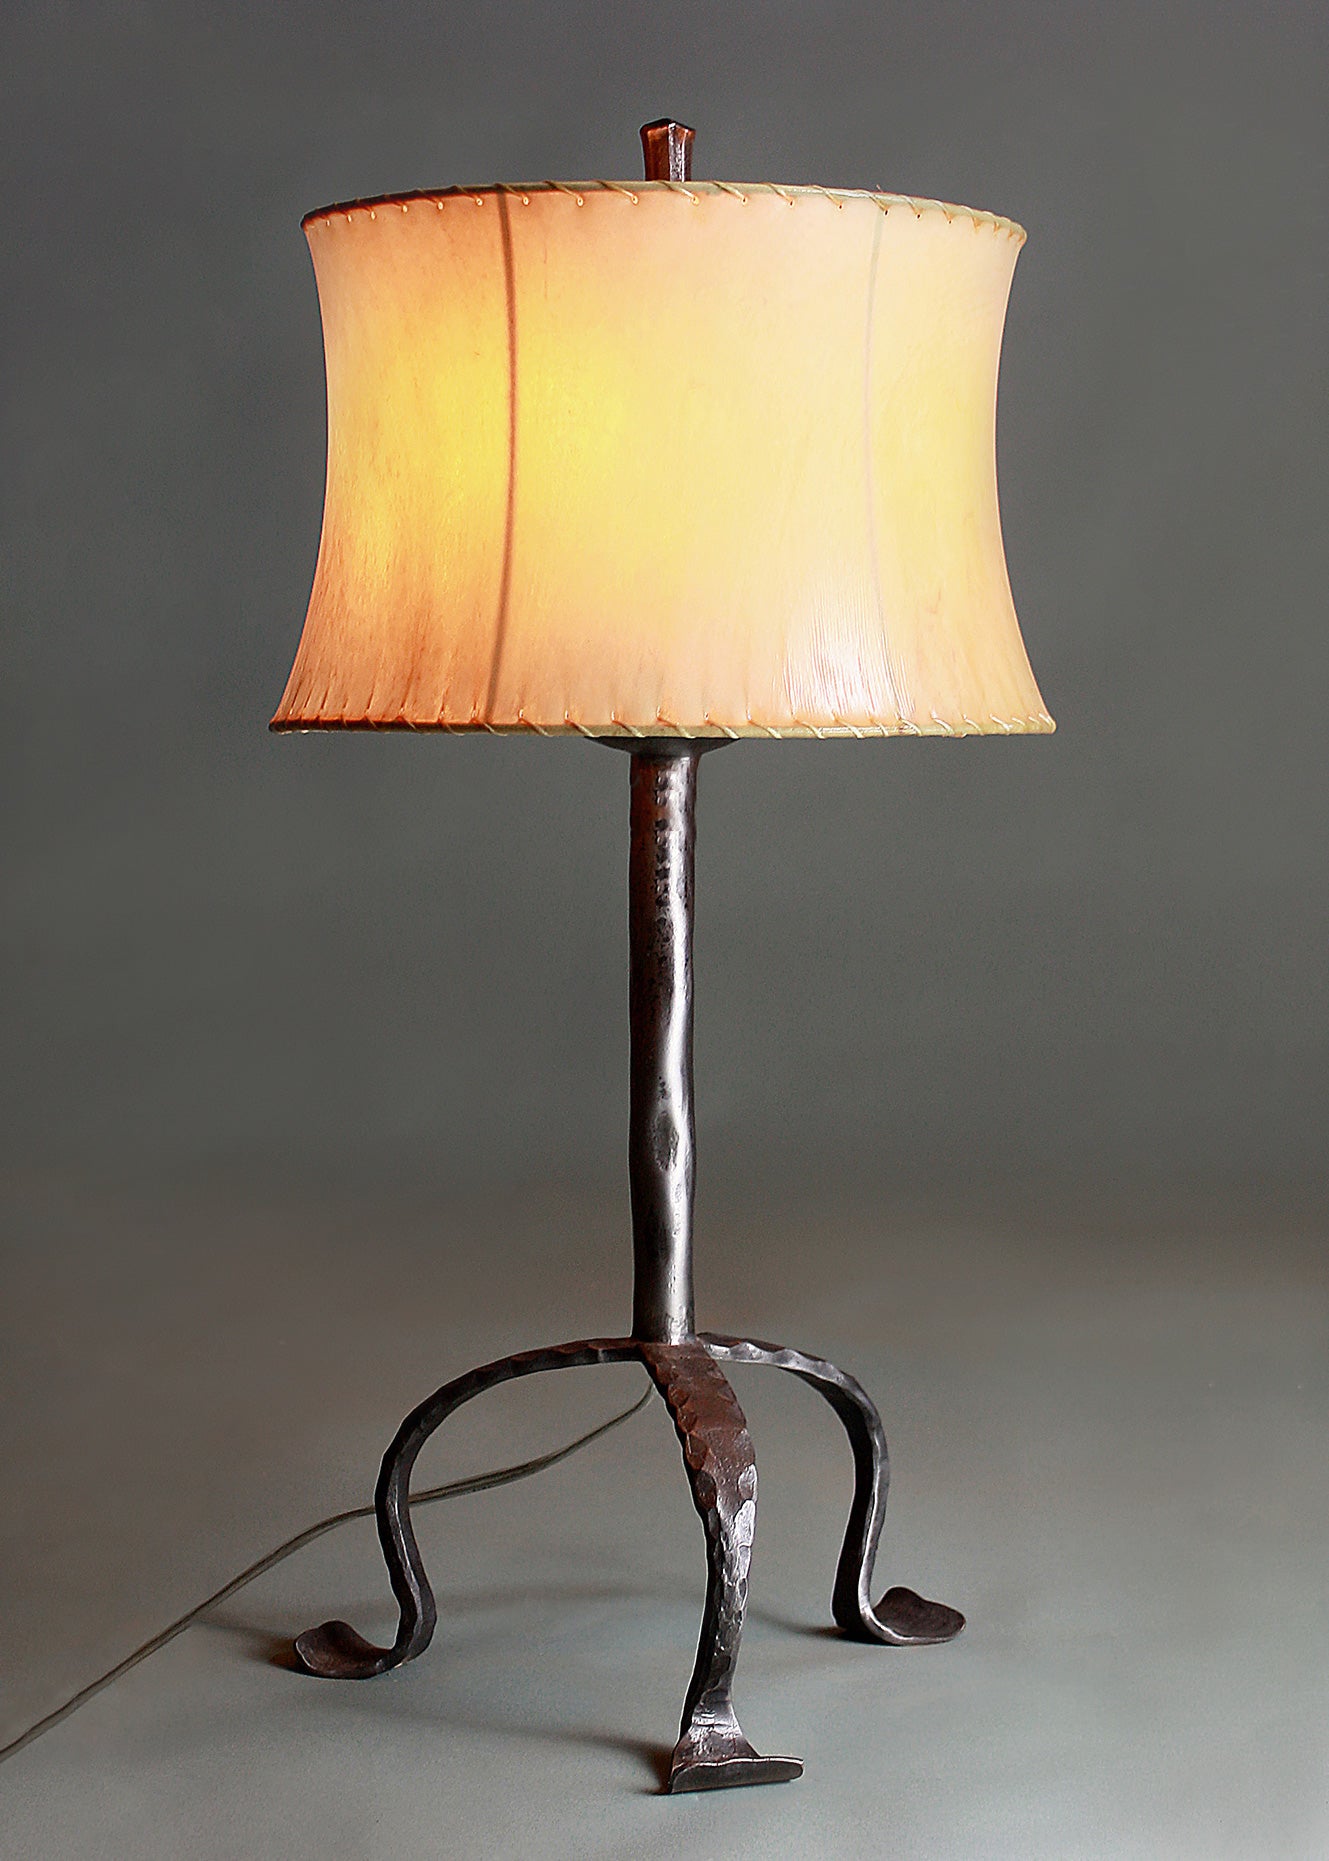 Simply Santa Fe Lamp + Contemporary Sheepskin Shade by Christopher Thomson Ironworks.